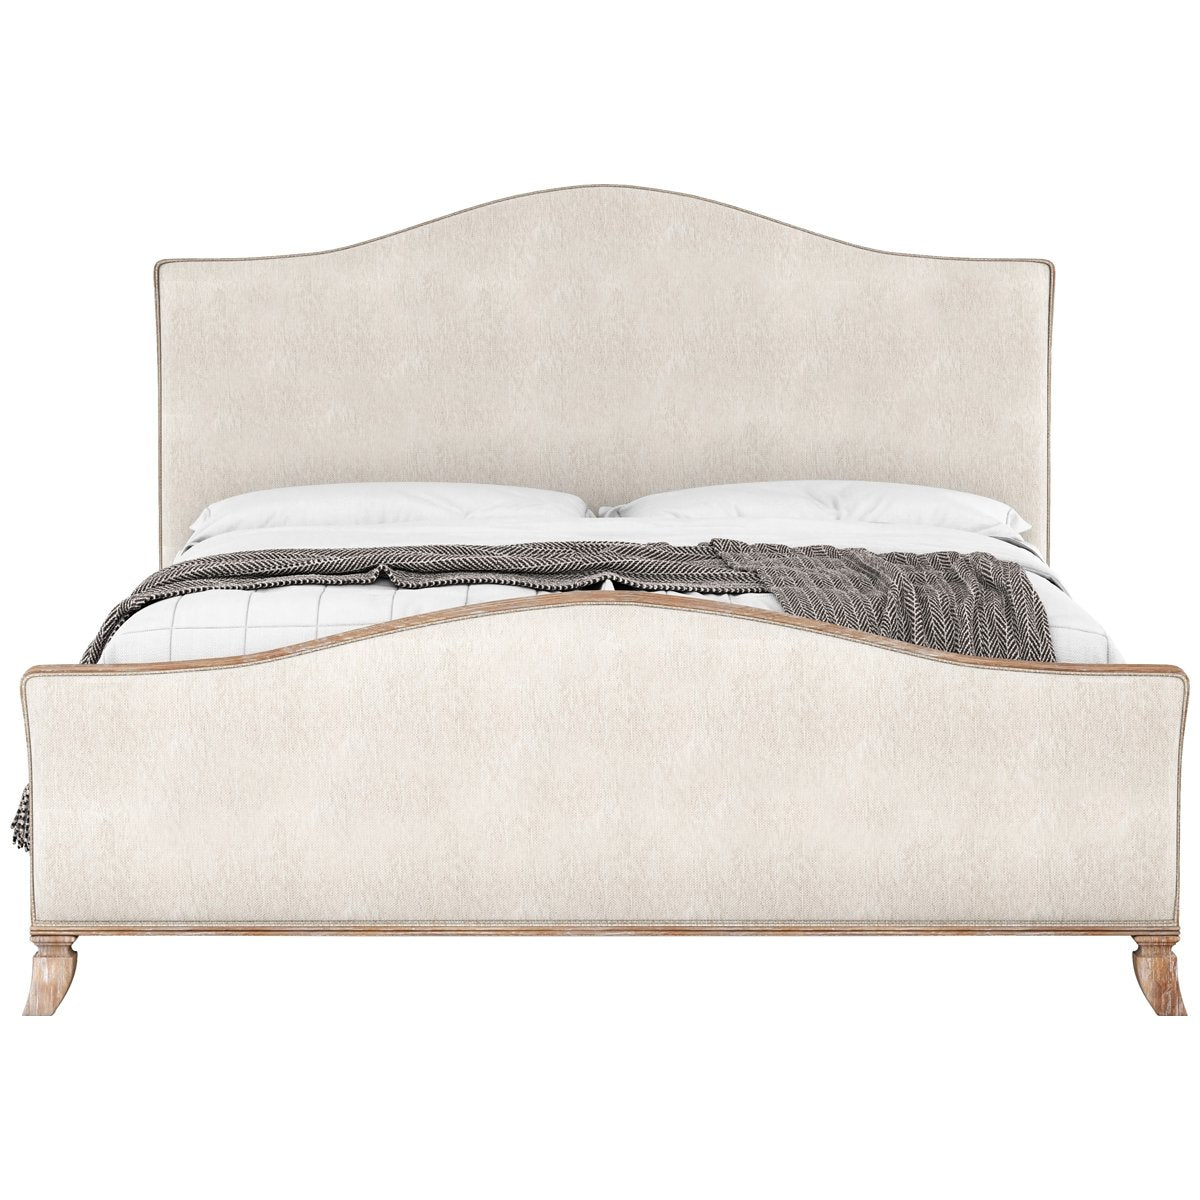 A.R.T. Furniture Palisade Sleigh Bed